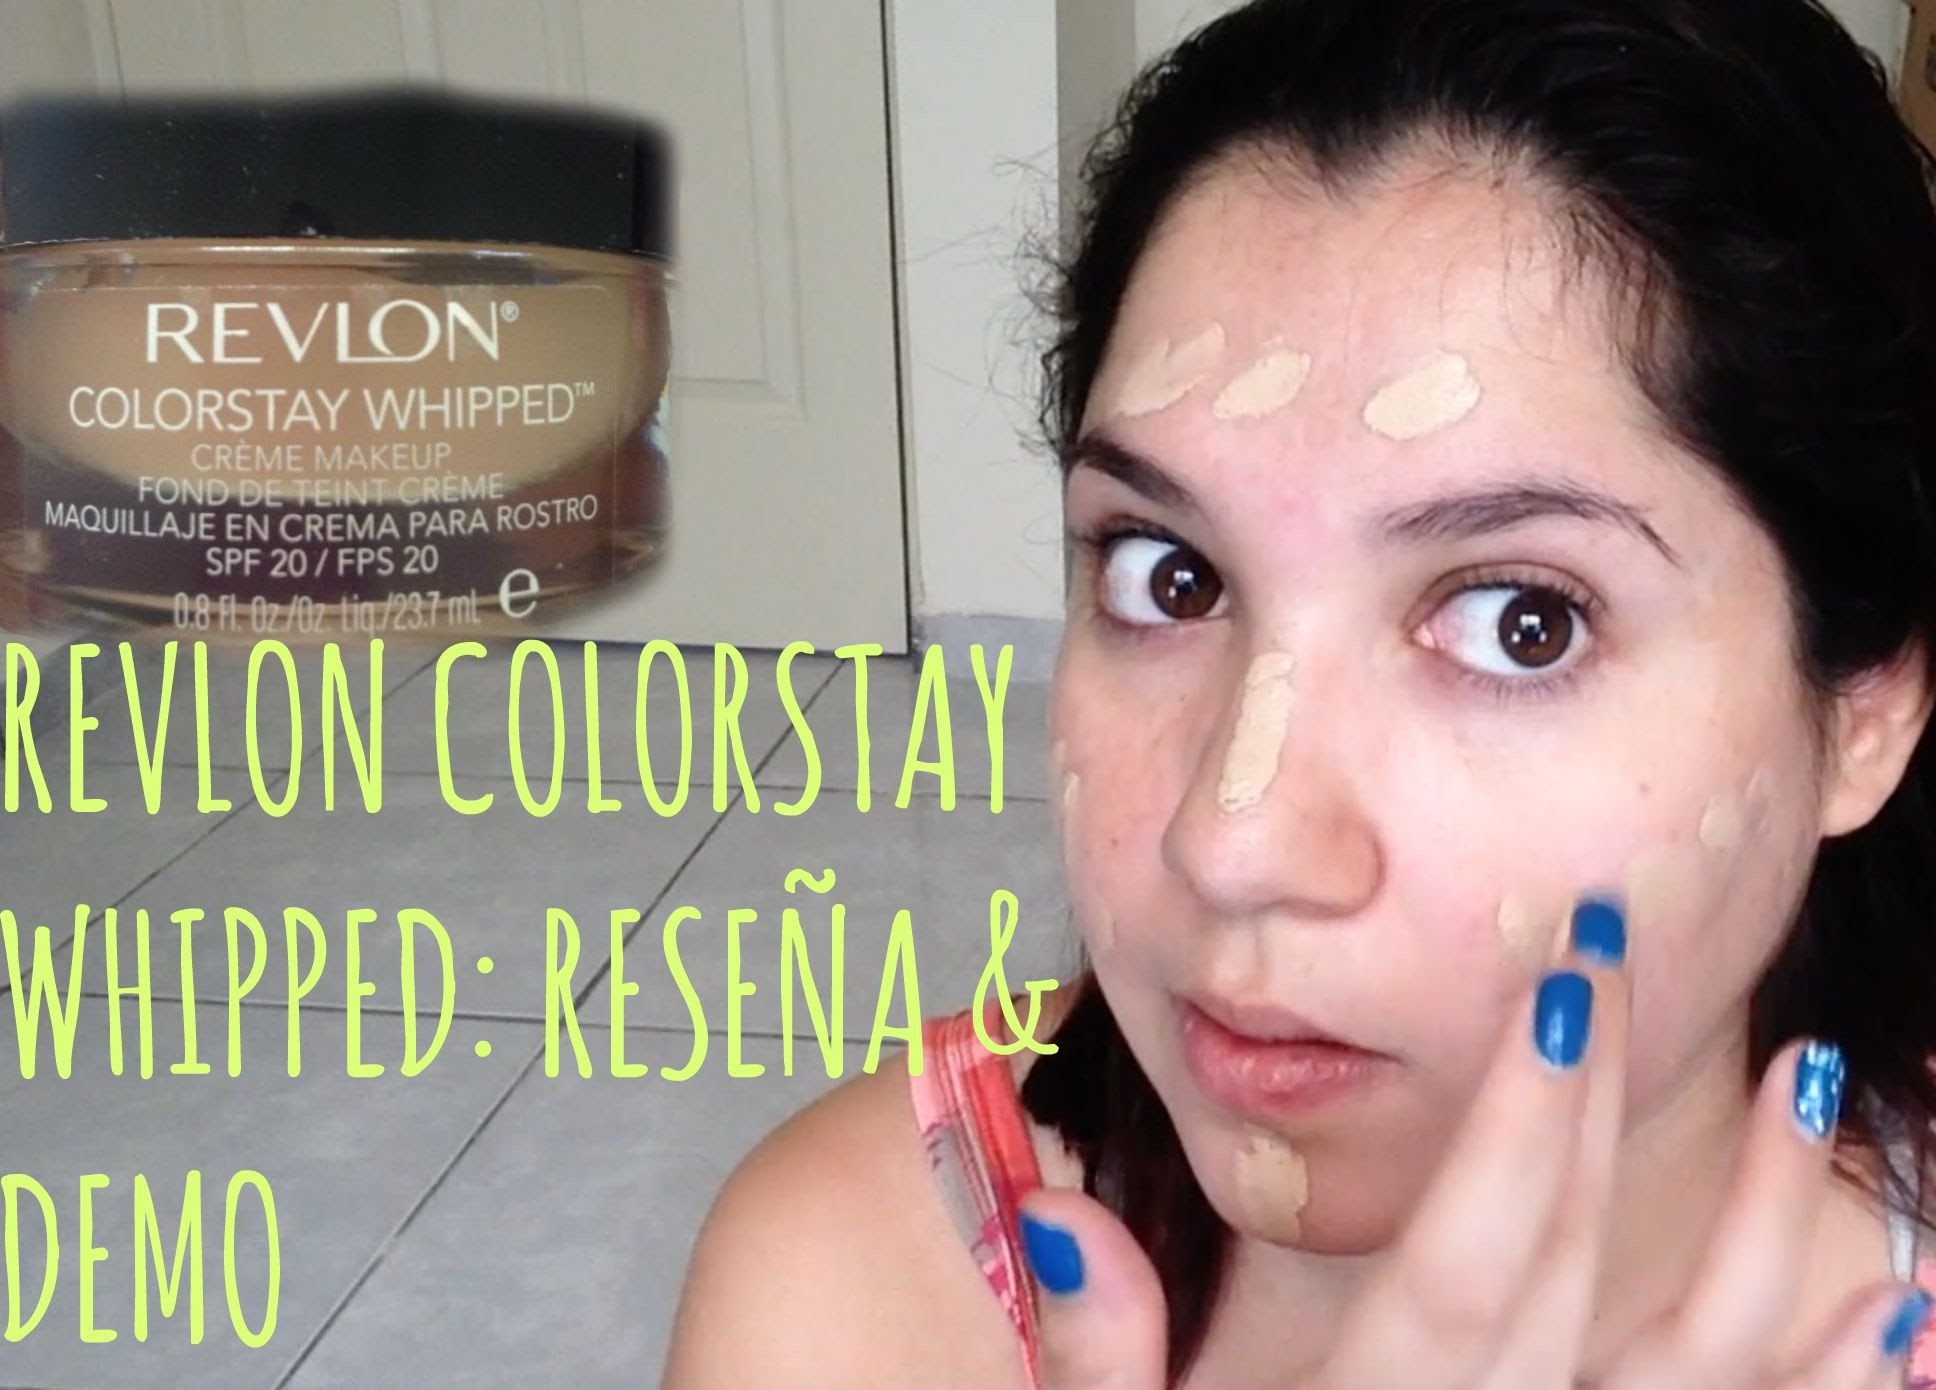 REVLON COLORSTAY WHIPPED: Reseña y Demo